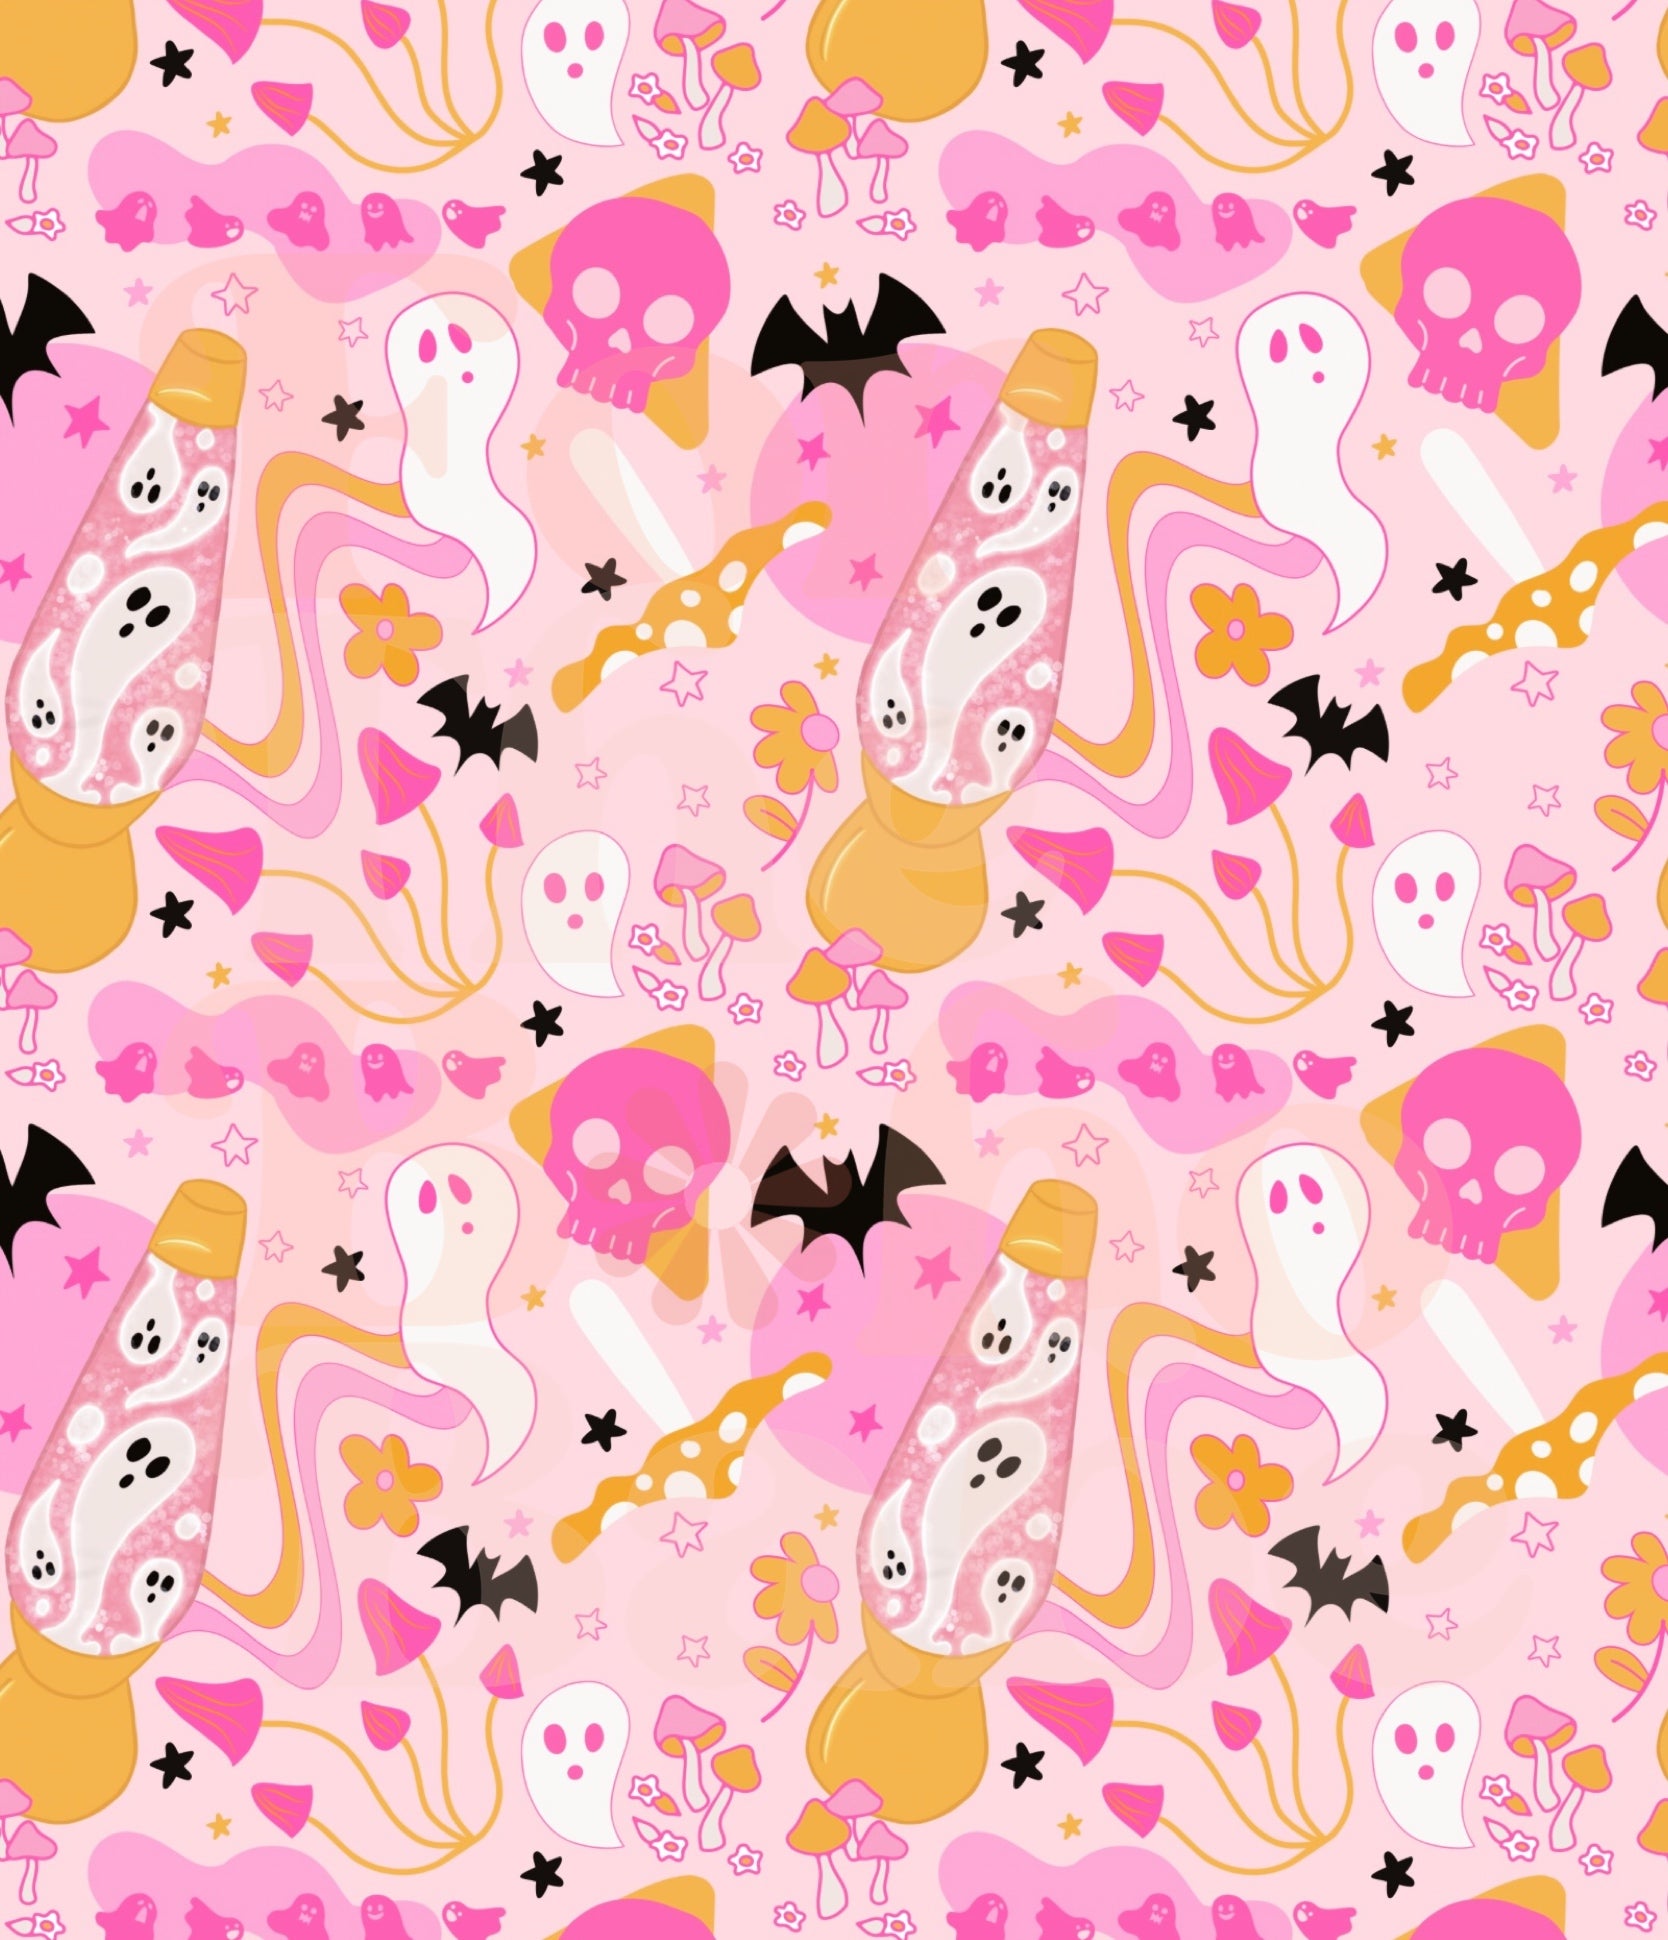 Groovy Ghosts seamless